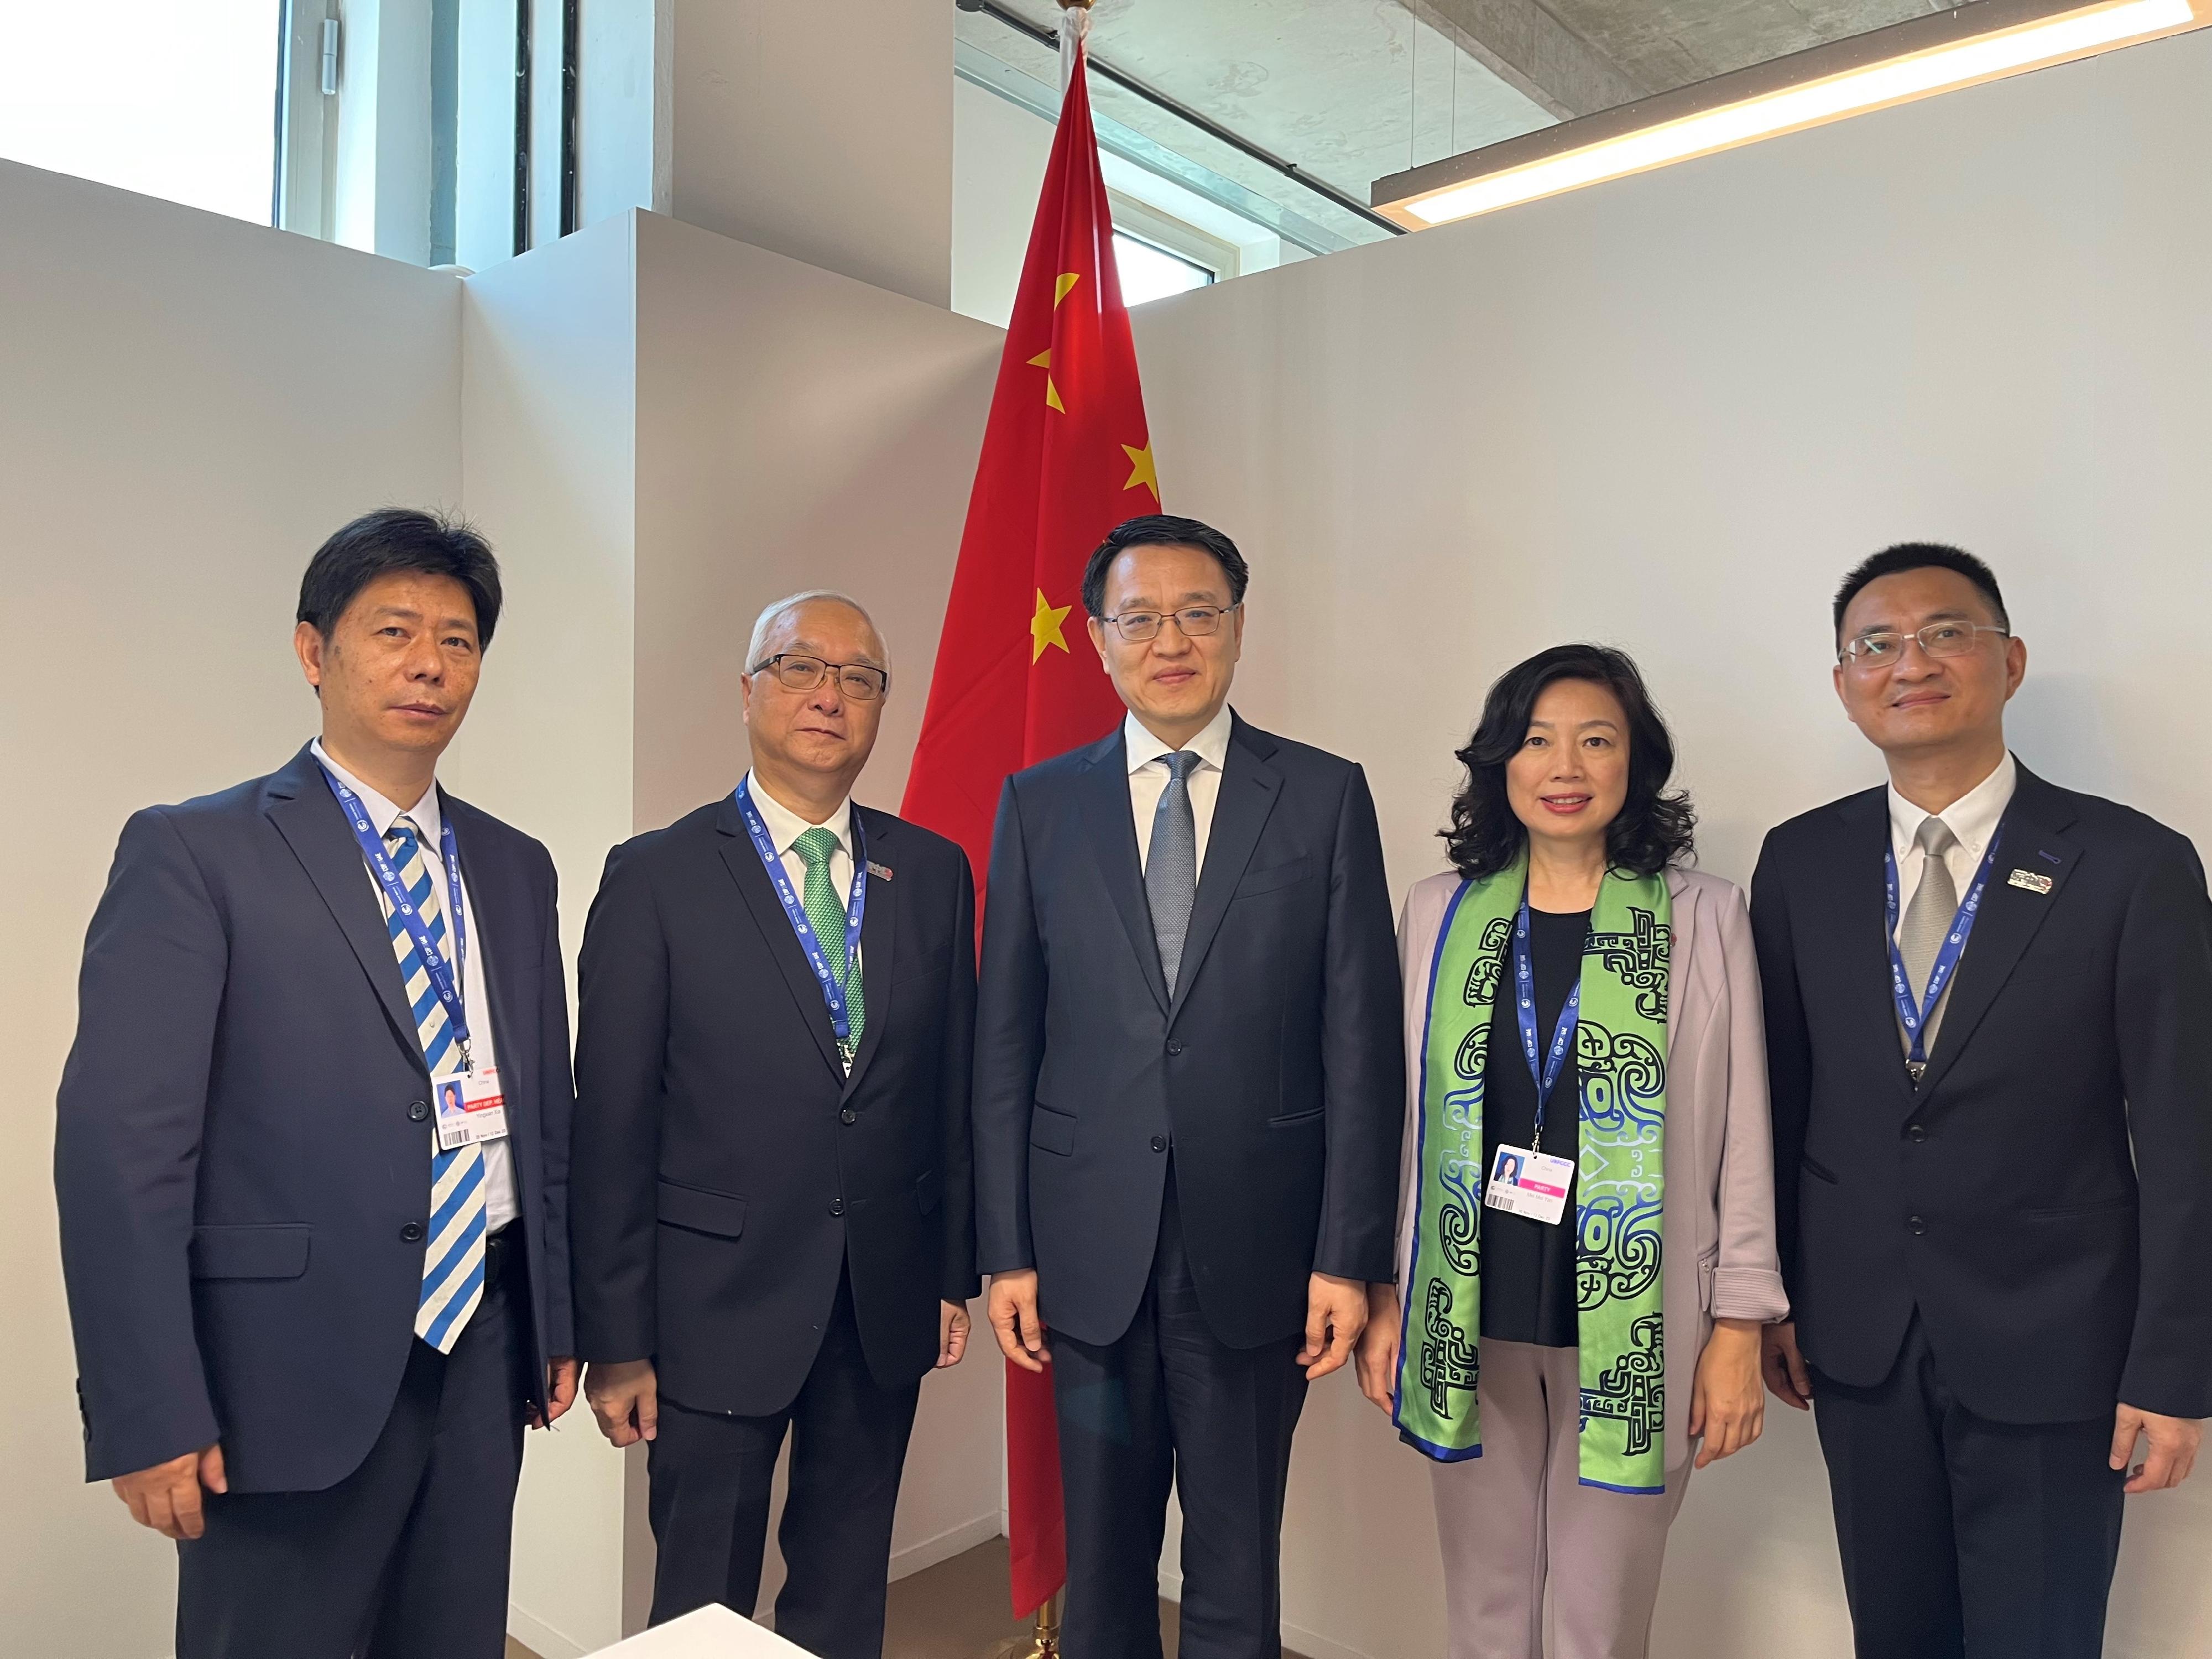 The Secretary for Environment and Ecology, Mr Tse Chin-wan (second left); the Permanent Secretary for Financial Services and the Treasury (Financial Services), Ms Salina Yan (second right), and the Commissioner for Climate Change, Mr Wong Chuen-fai (first right), yesterday (December 1, Dubai time) met with Vice Minister of the Ministry of Ecology and Environment Mr Zhao Yingmin (centre) and the Director of the Department of Climate Change of the Ministry of Ecology and Environment, Mr Xia Yingxian (first left), in Dubai, the United Arab Emirates.